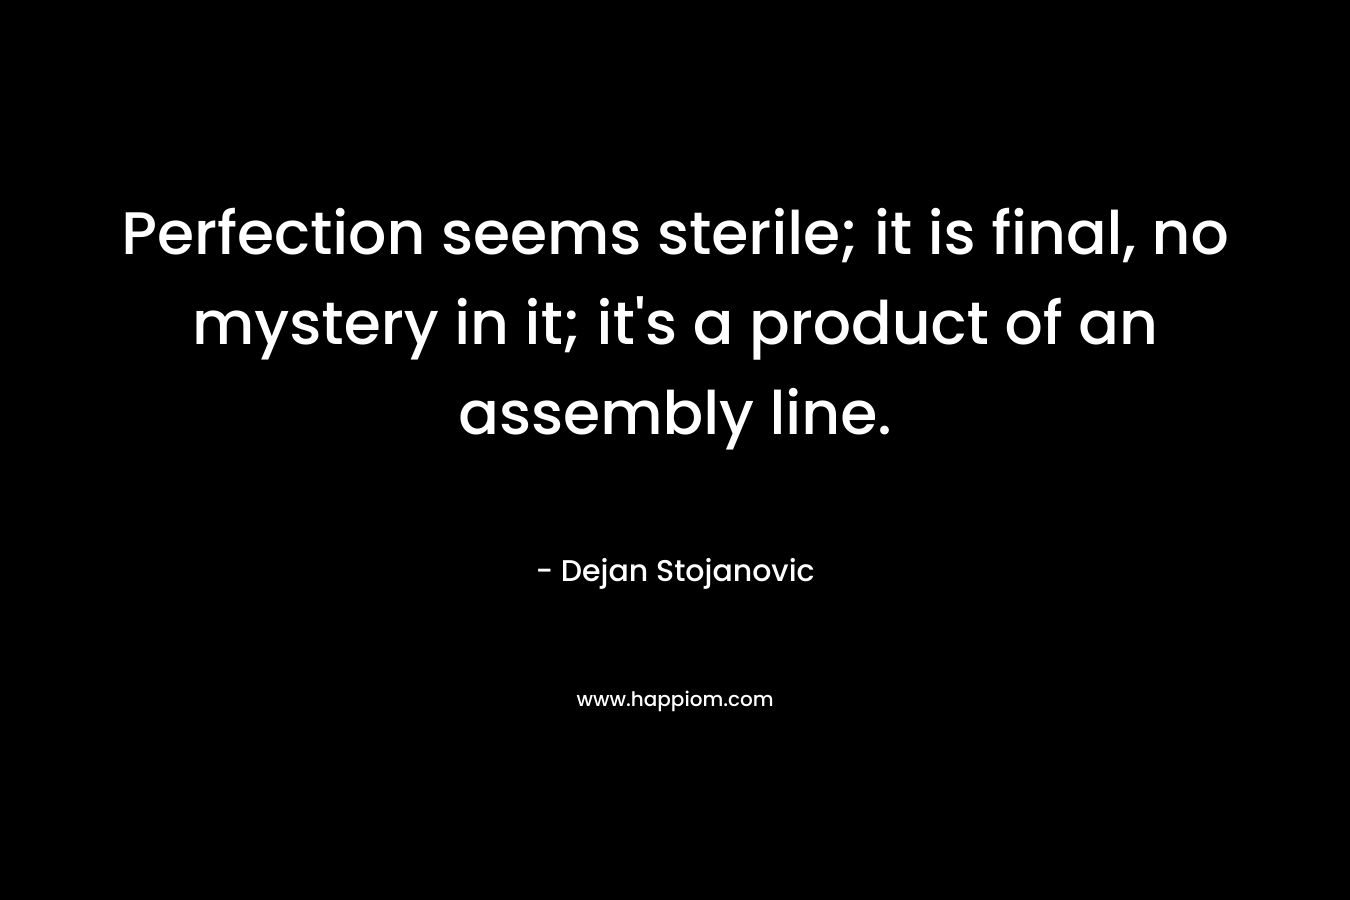 Perfection seems sterile; it is final, no mystery in it; it’s a product of an assembly line. – Dejan Stojanovic